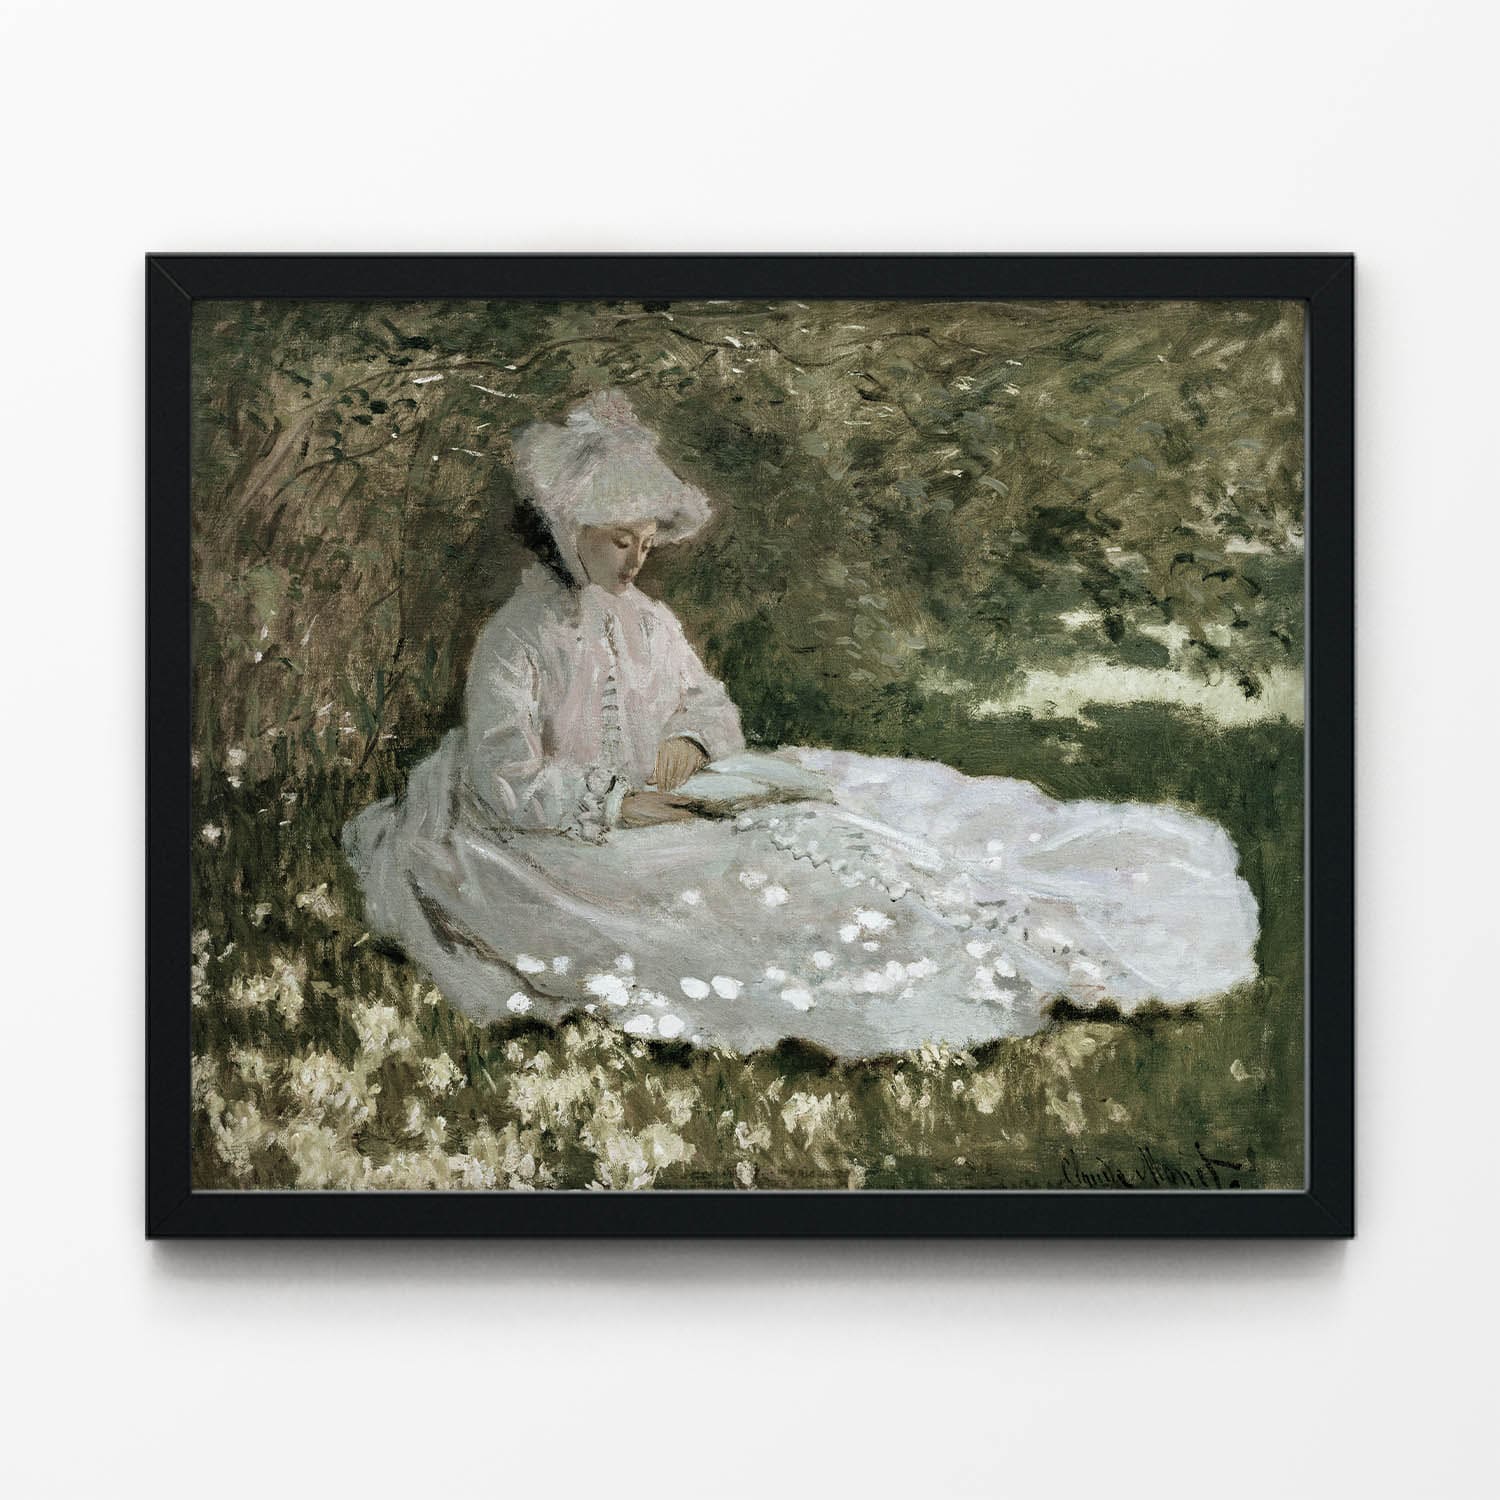 Woman in a White Dress Art Print in Black Picture Frame